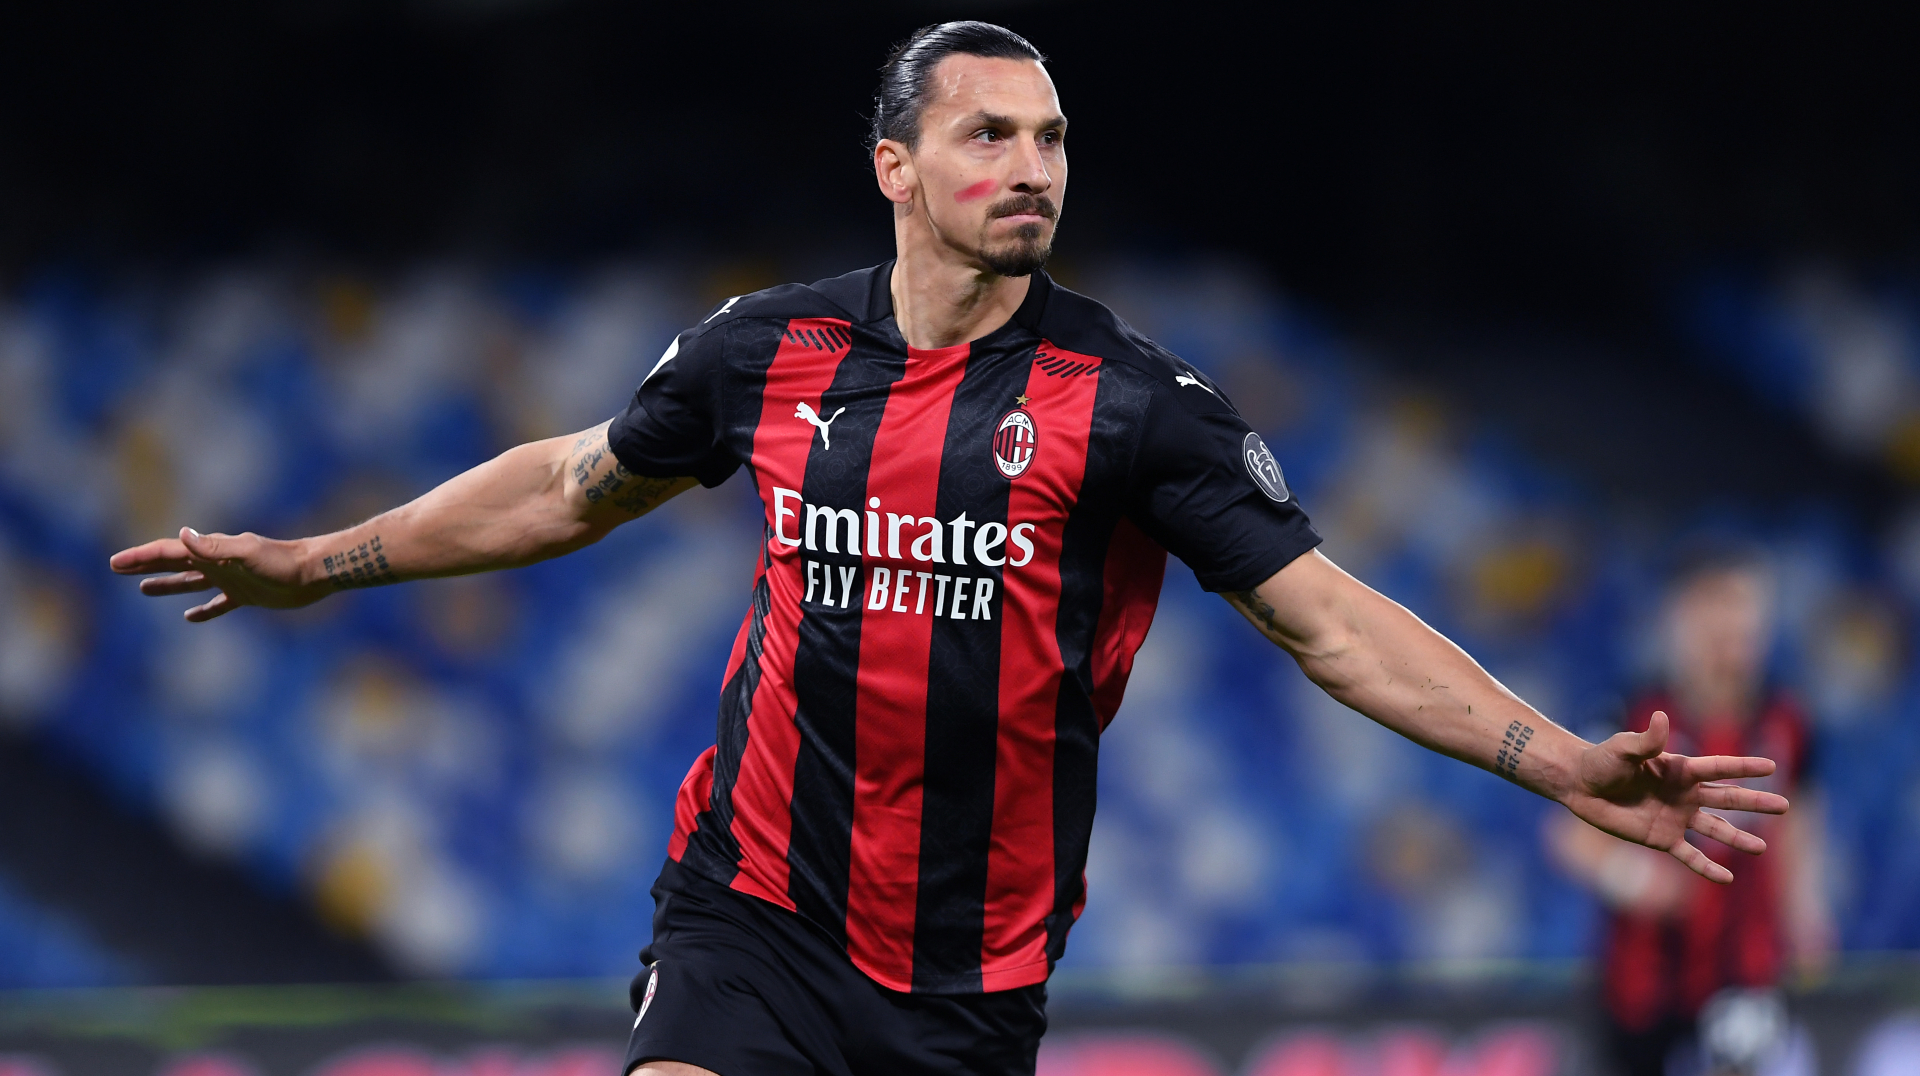 Zlatan Ibrahimovic of A.C. Milan celebrates after scoring their team's first goal during the Serie A match between SSC Napoli and AC Milan at Stadio San Paolo on November 22, 2020 in Naples, Italy.